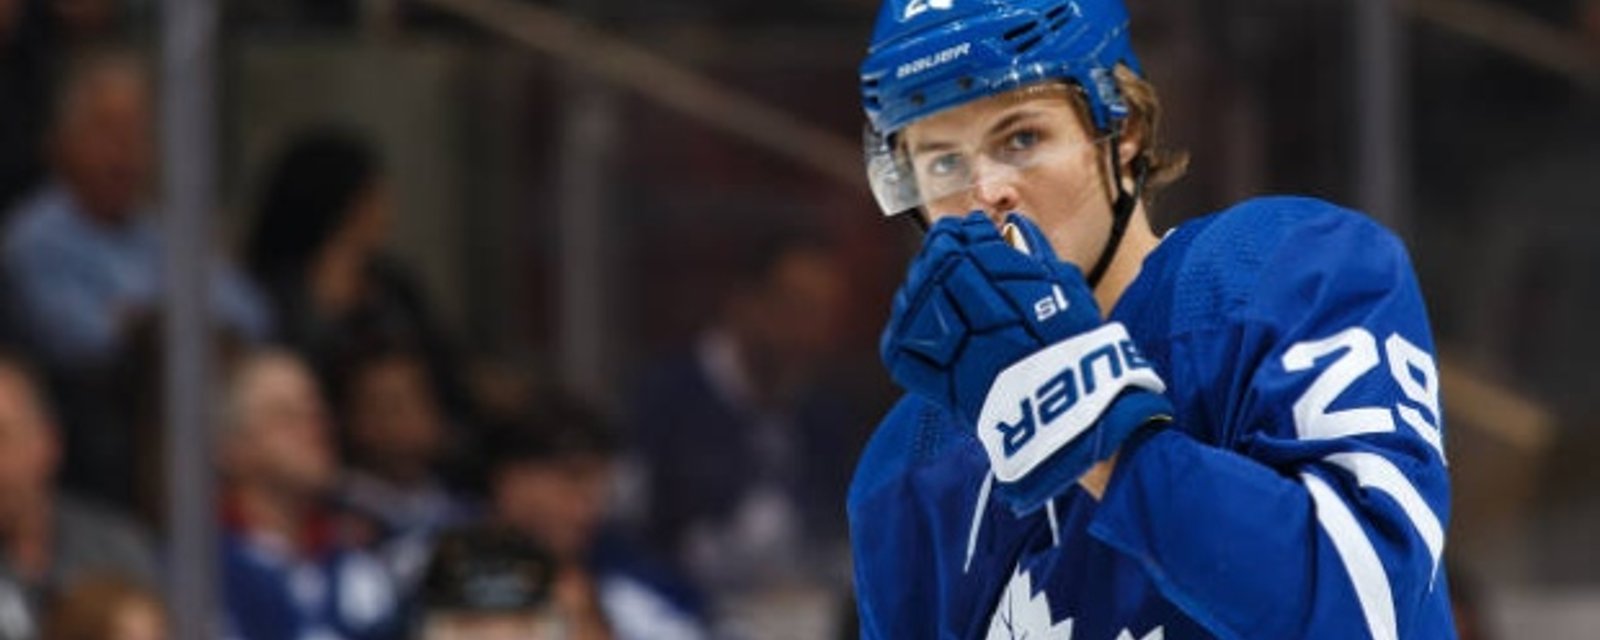 A significant change in the Leafs’ trade plan involving Nylander 